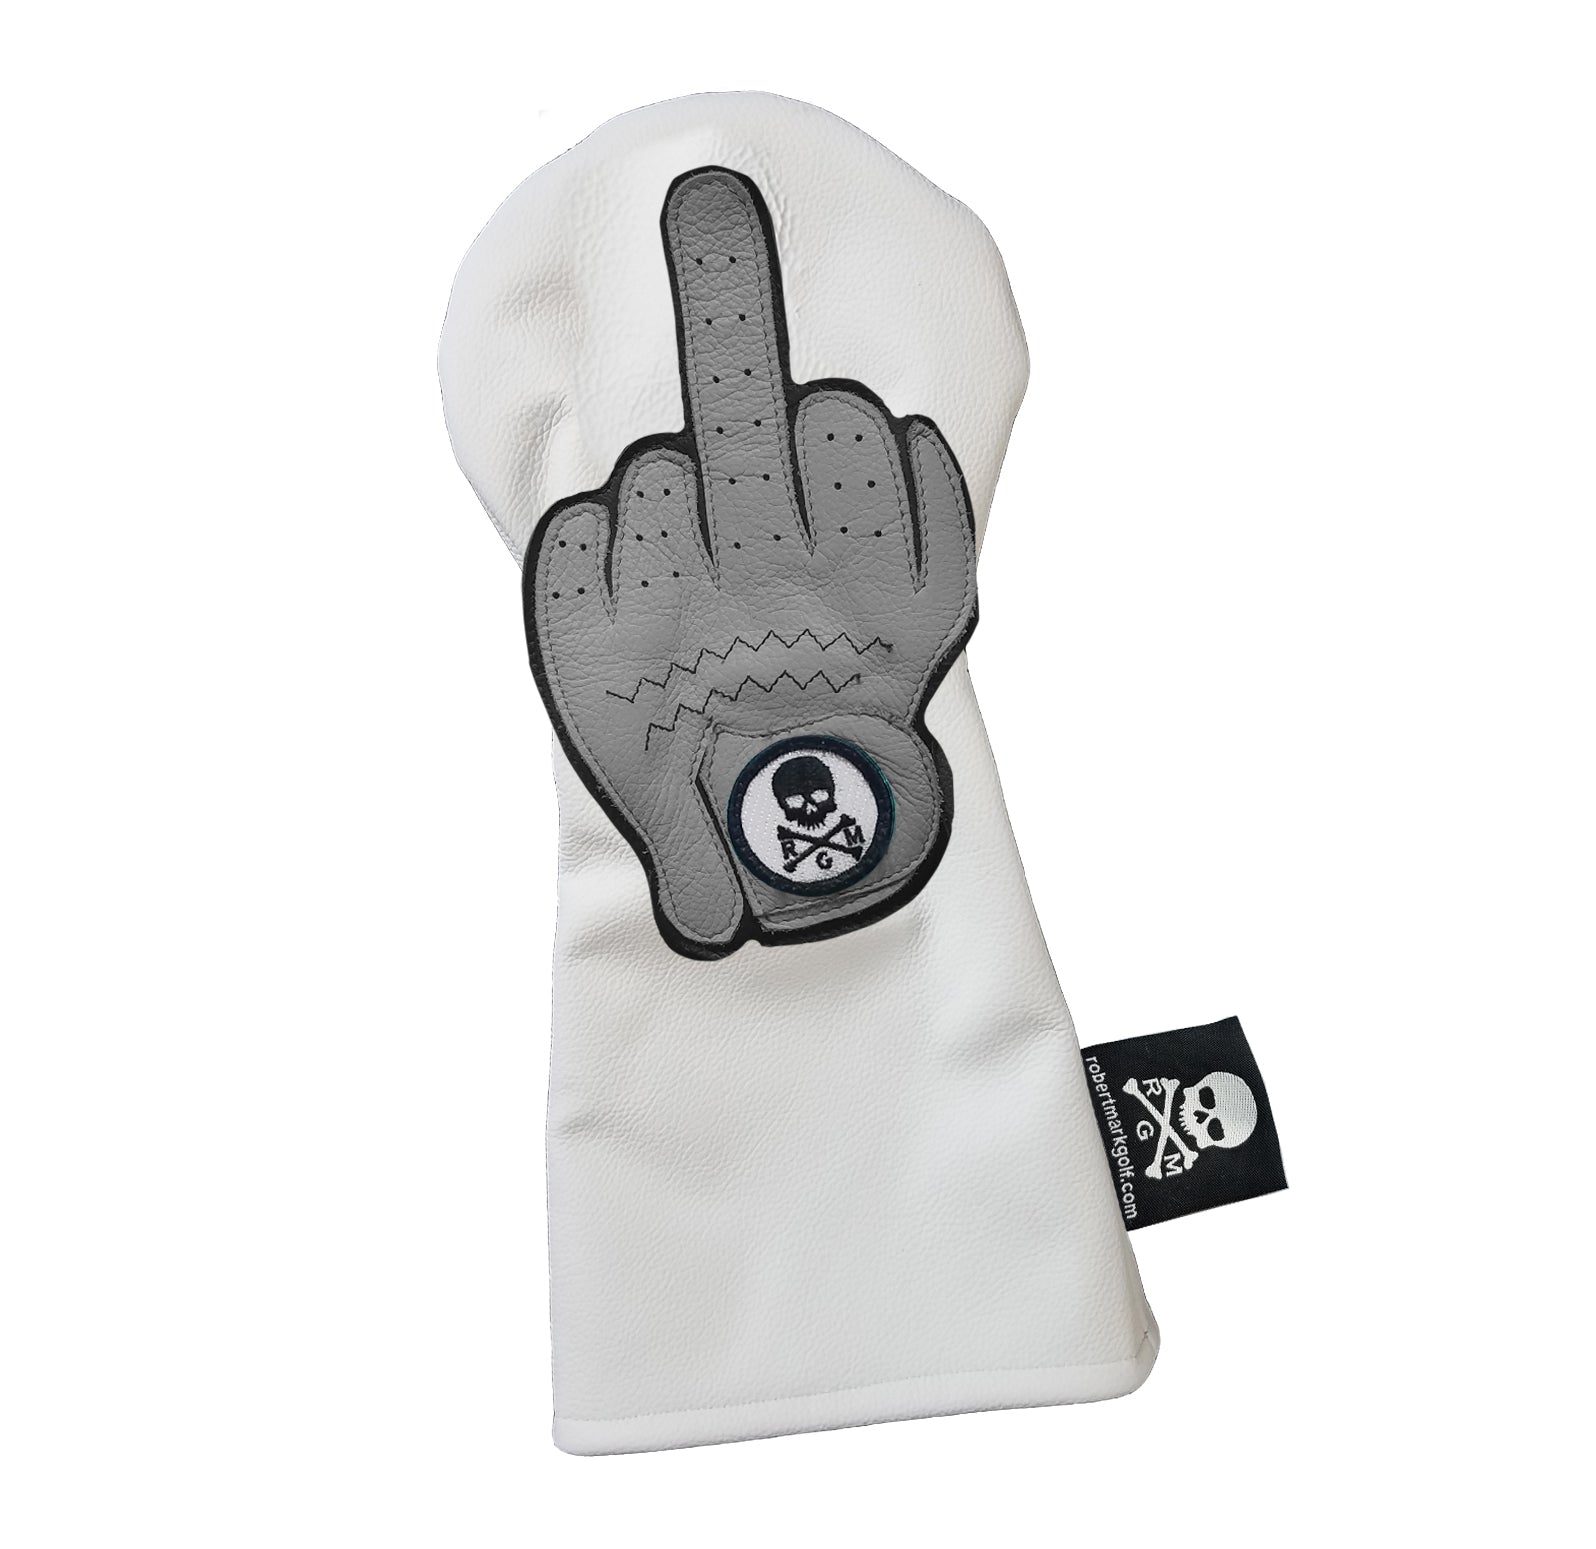 NEW! LTD Edition GFY "The Finger" Headcover - Multi Colors Available - Robert Mark Golf